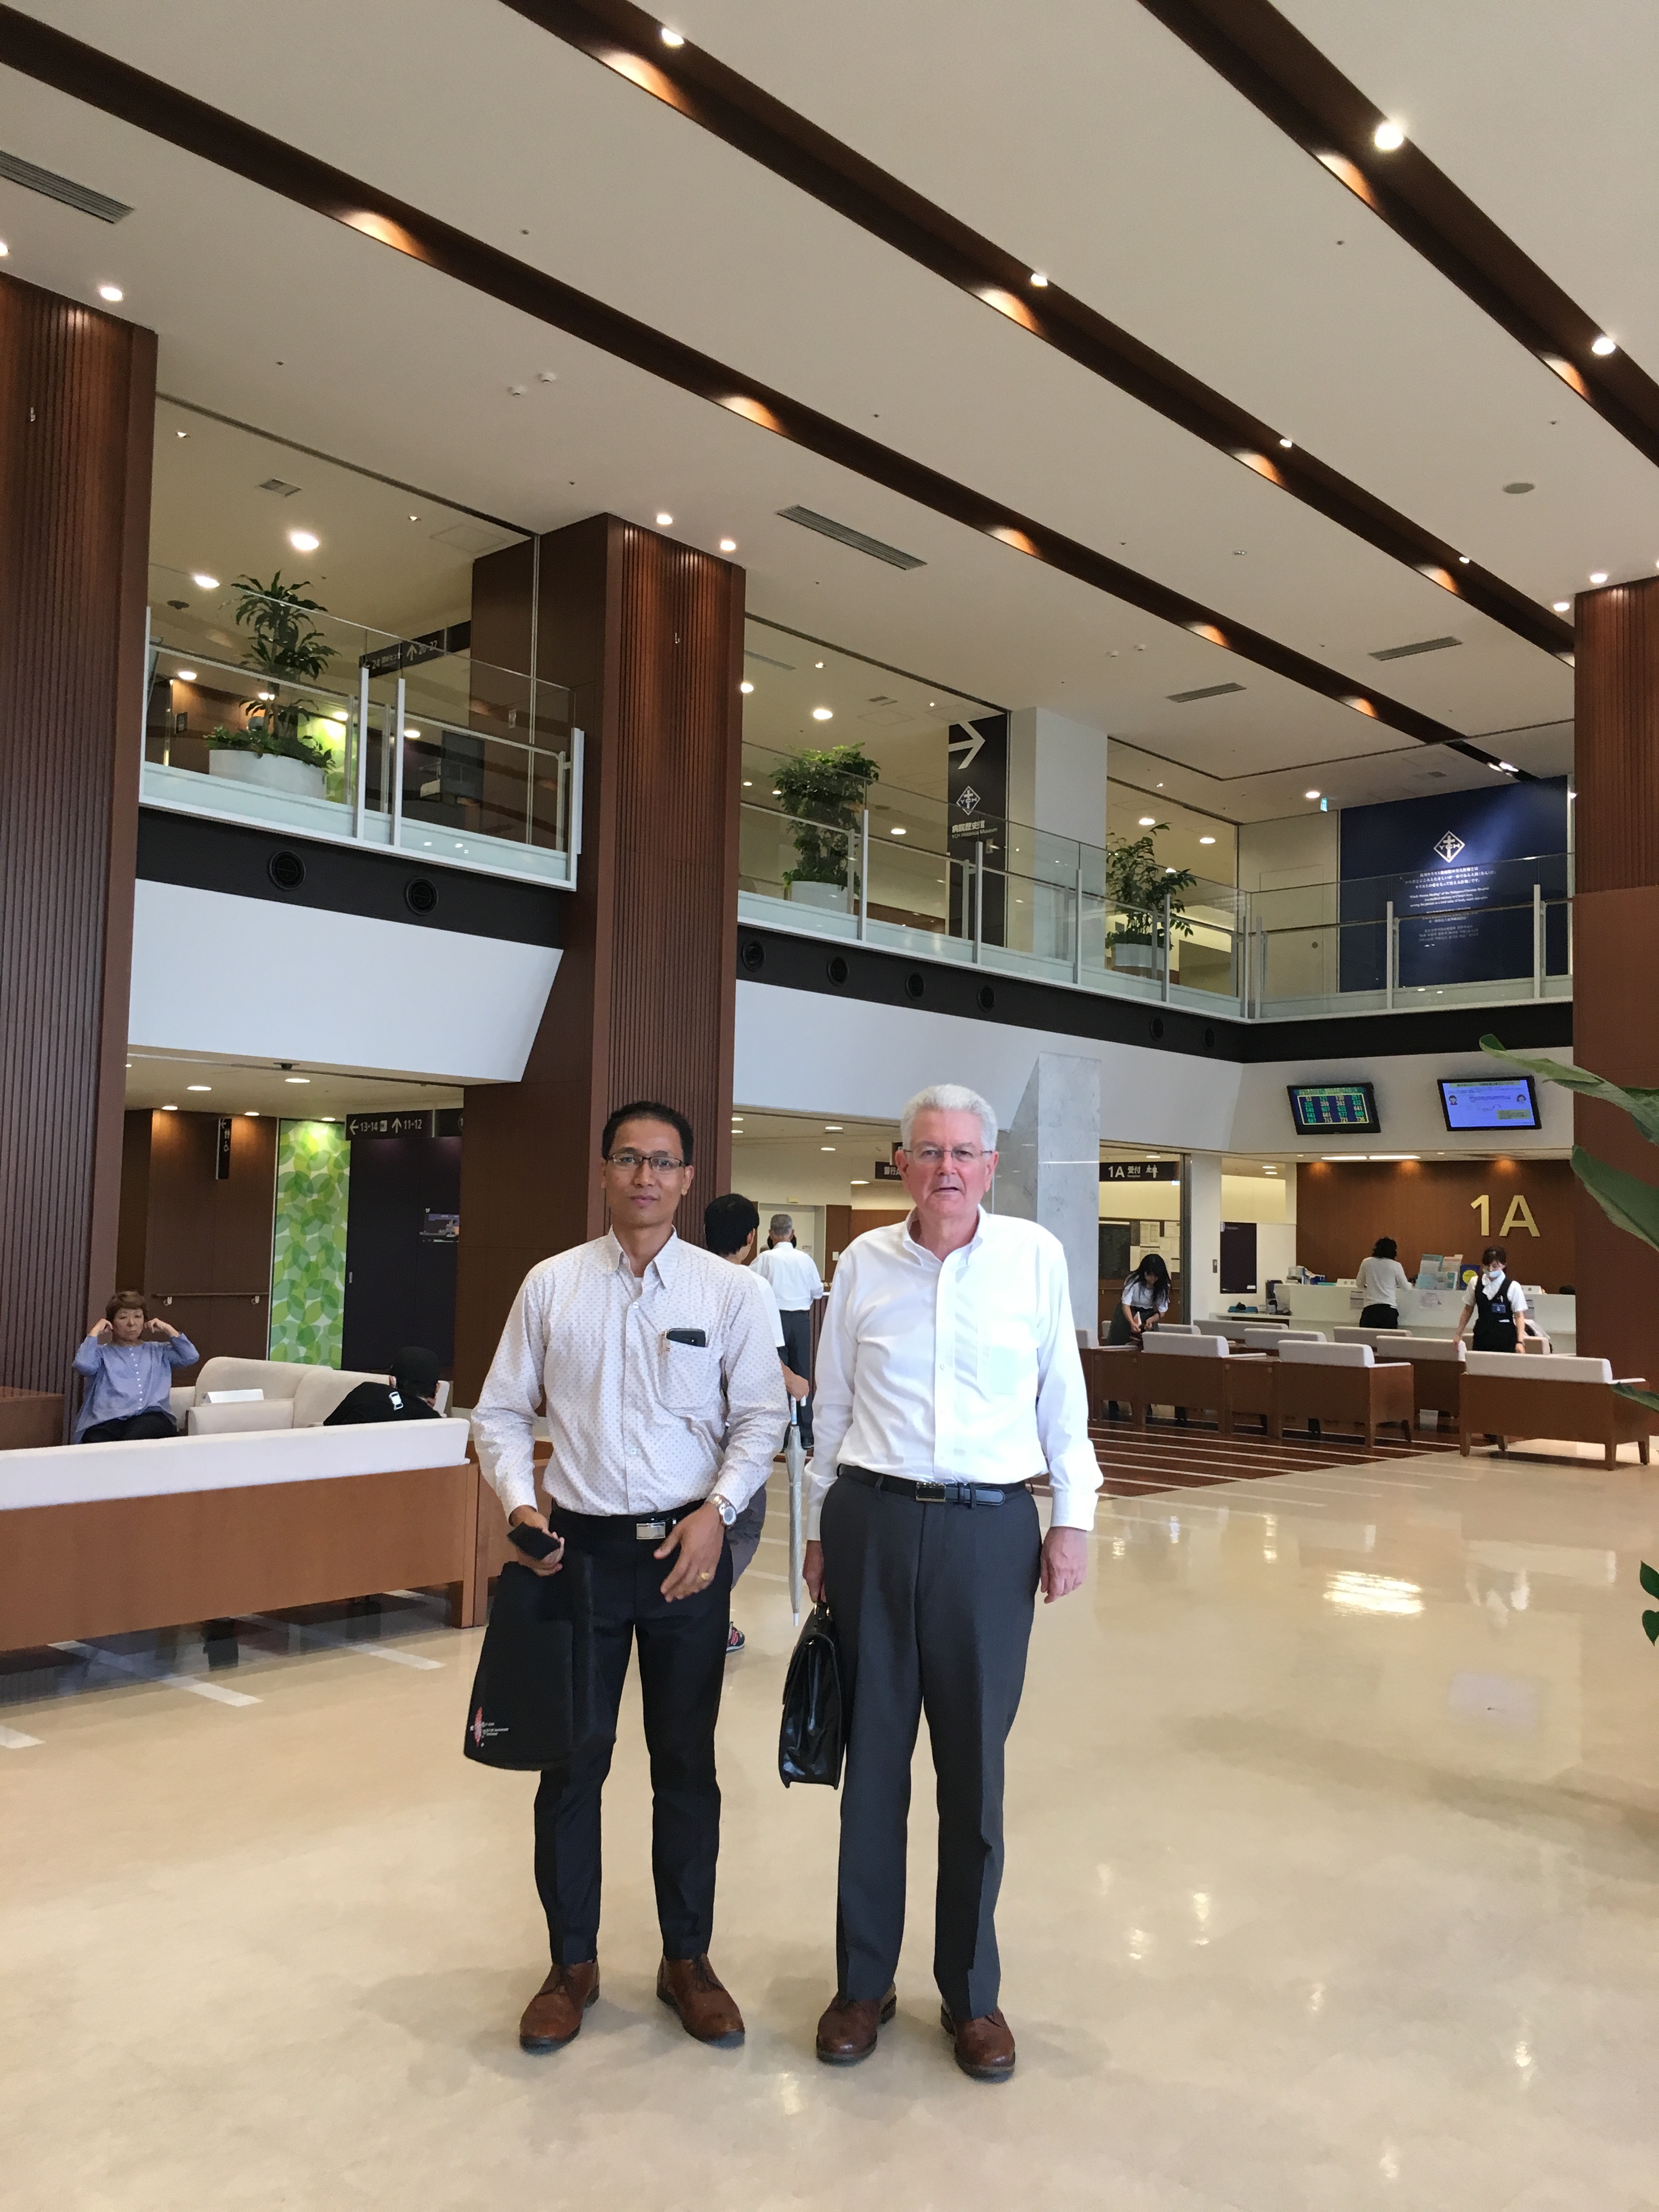 Mr. Puia and Bill in the lobby of Yodogawa Christian Hospital.